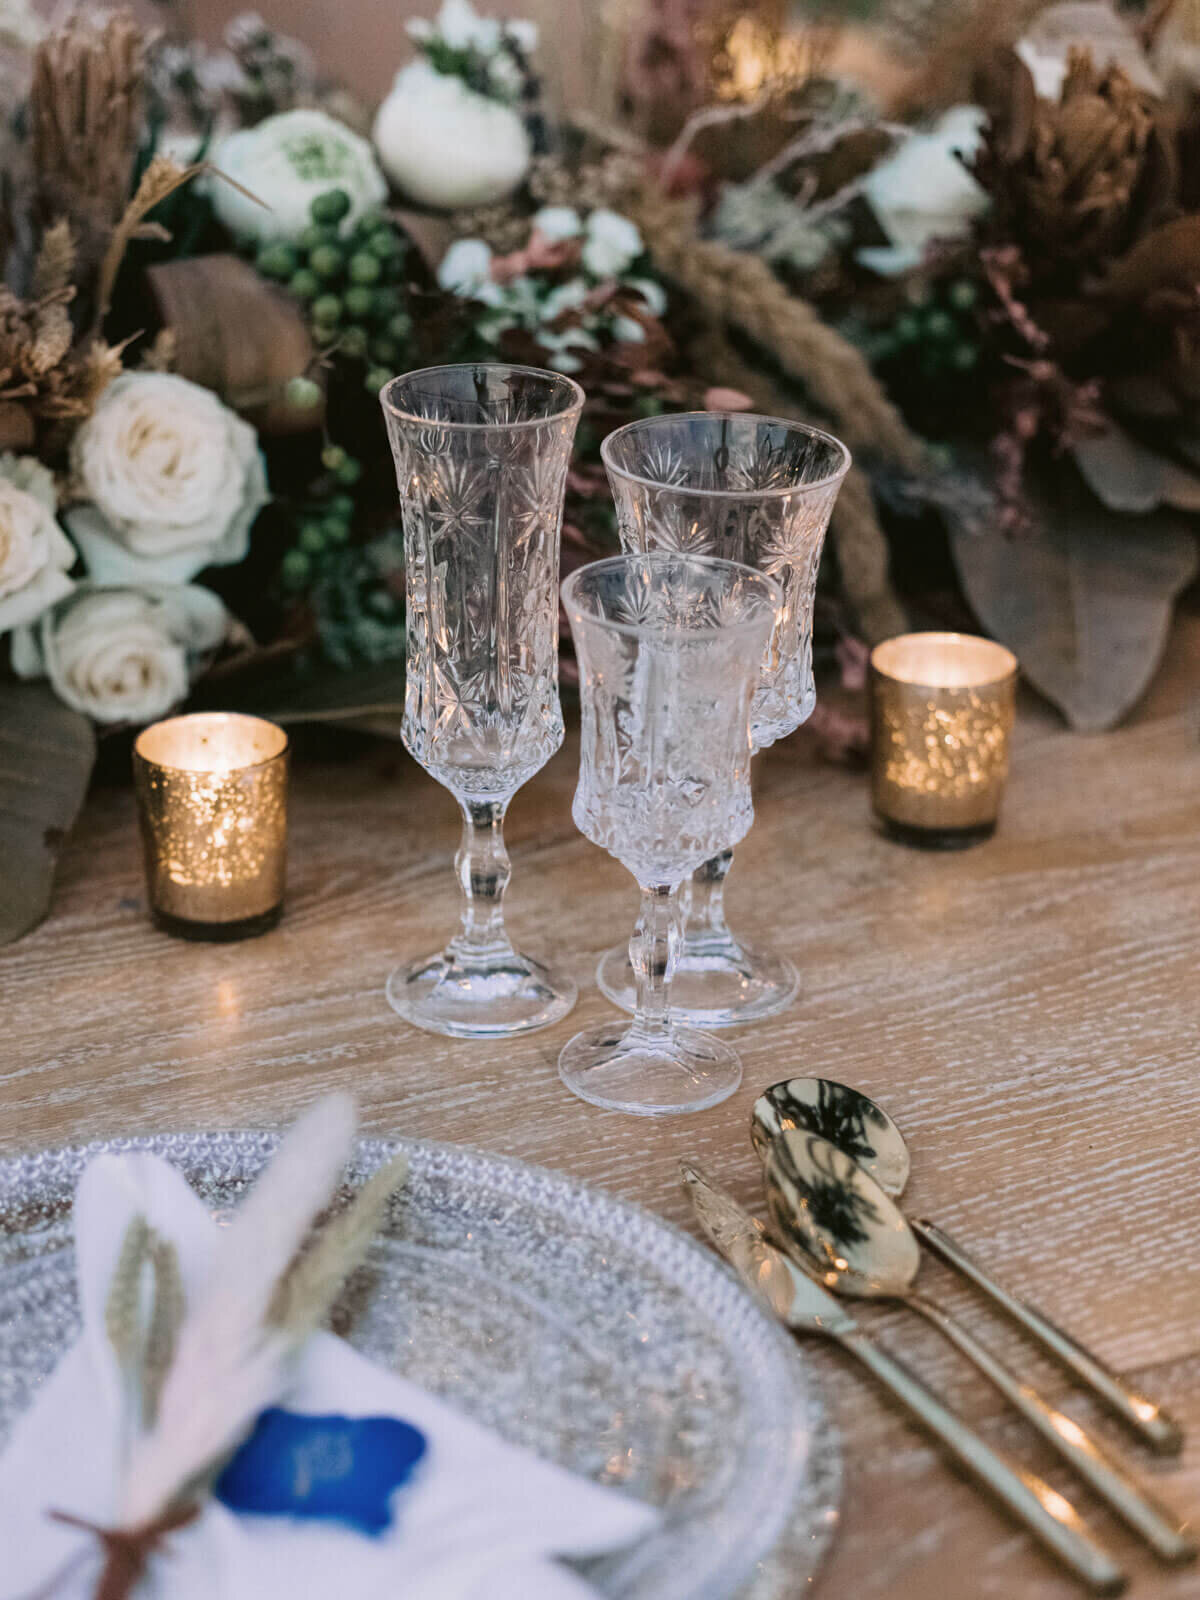 Elegant plate, cutleries, and wine glasses on a table with pretty flowers in Khayangan Estate, Indonesia. Image by Jenny Fu Studio